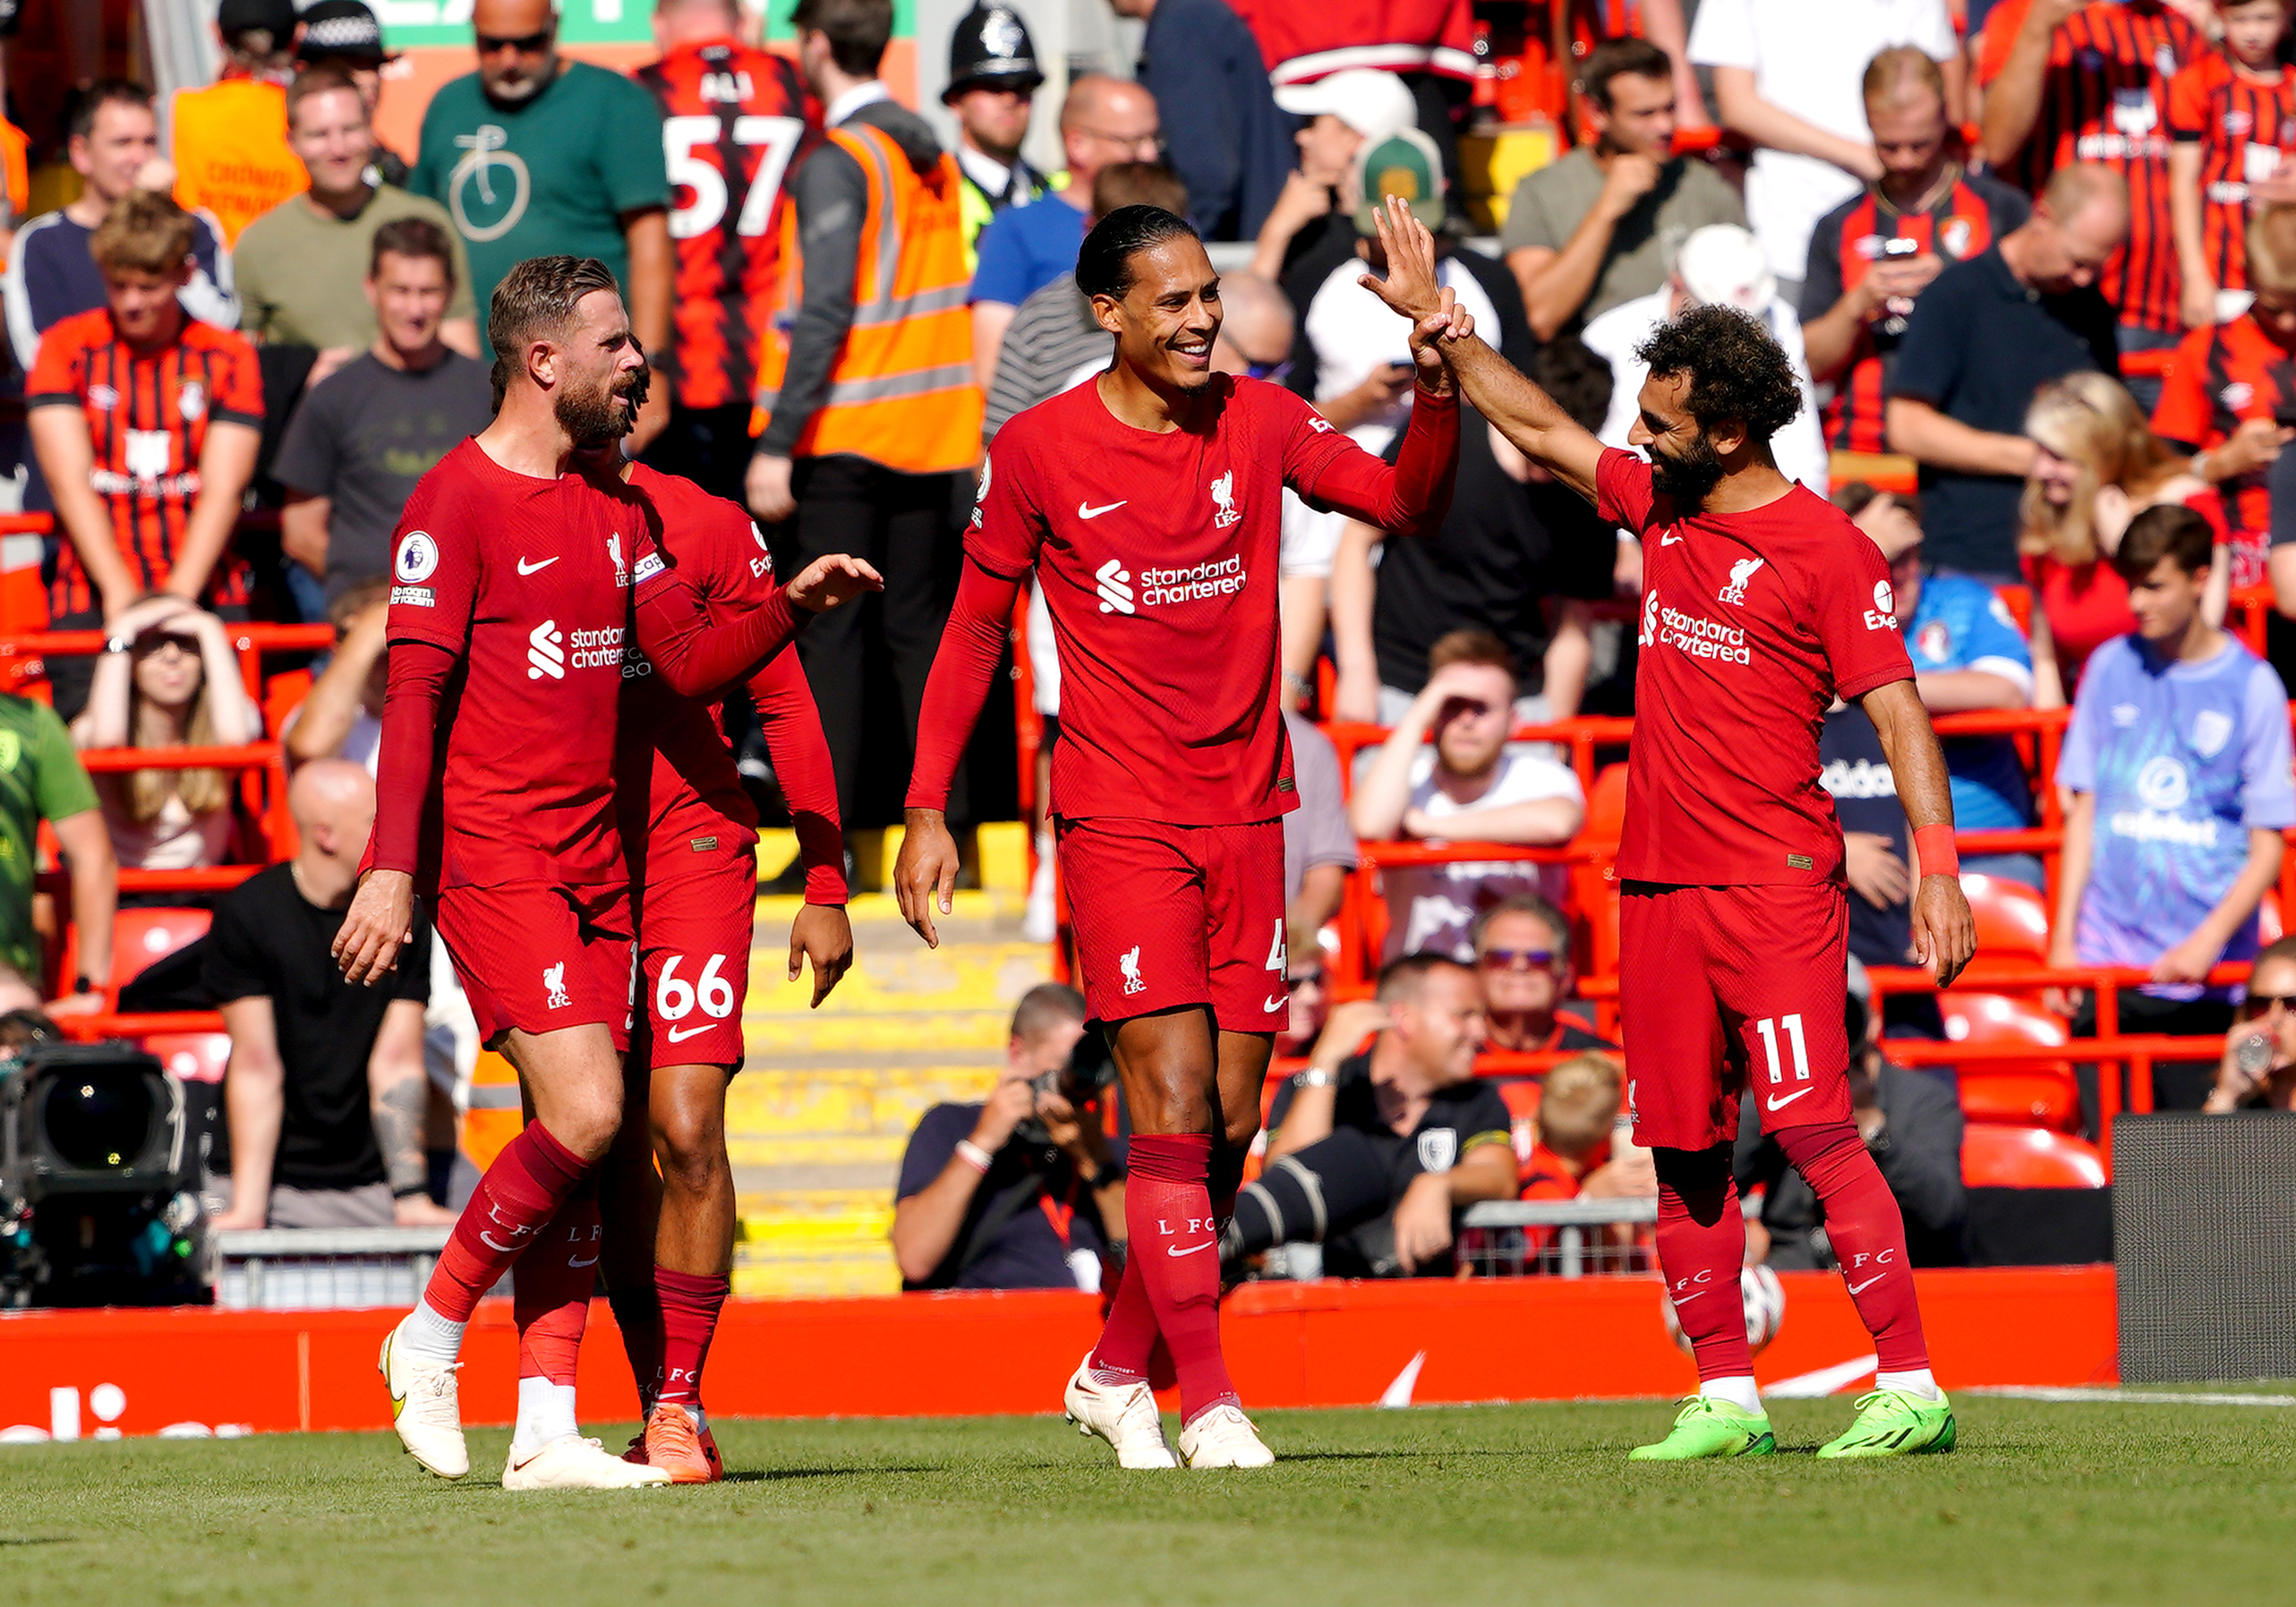 Virgil van Dijk hopes Liverpool can build on thumping win over Bournemouth